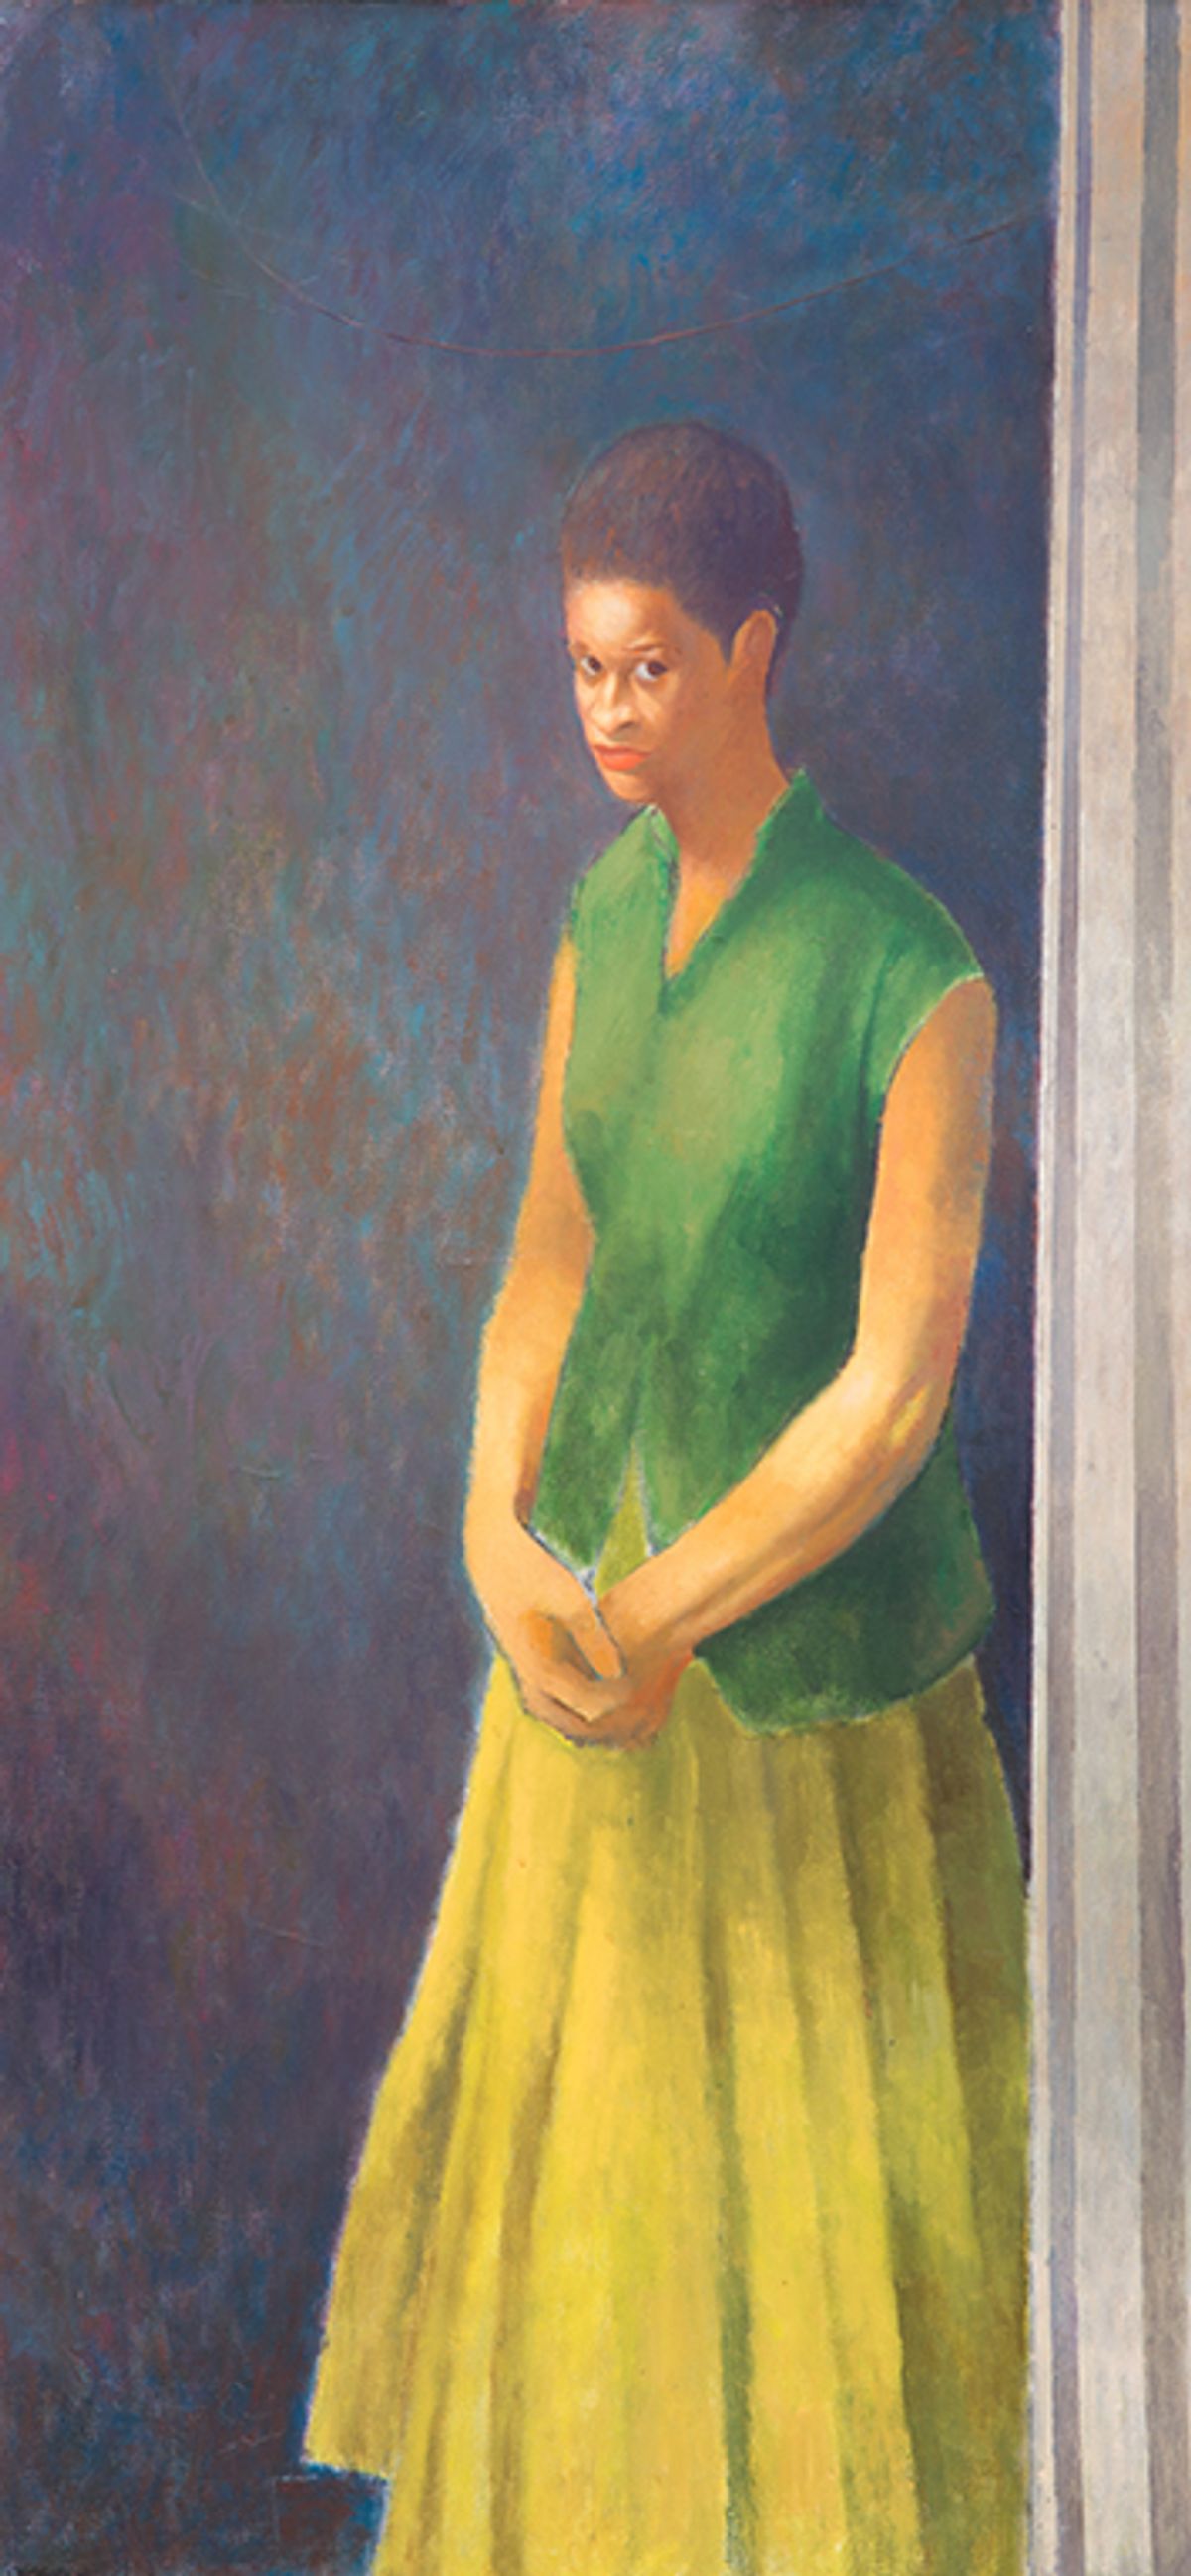 Charles White's Young Woman (Unfinished Painting No. 6) from 1965-66 ACA Galleries